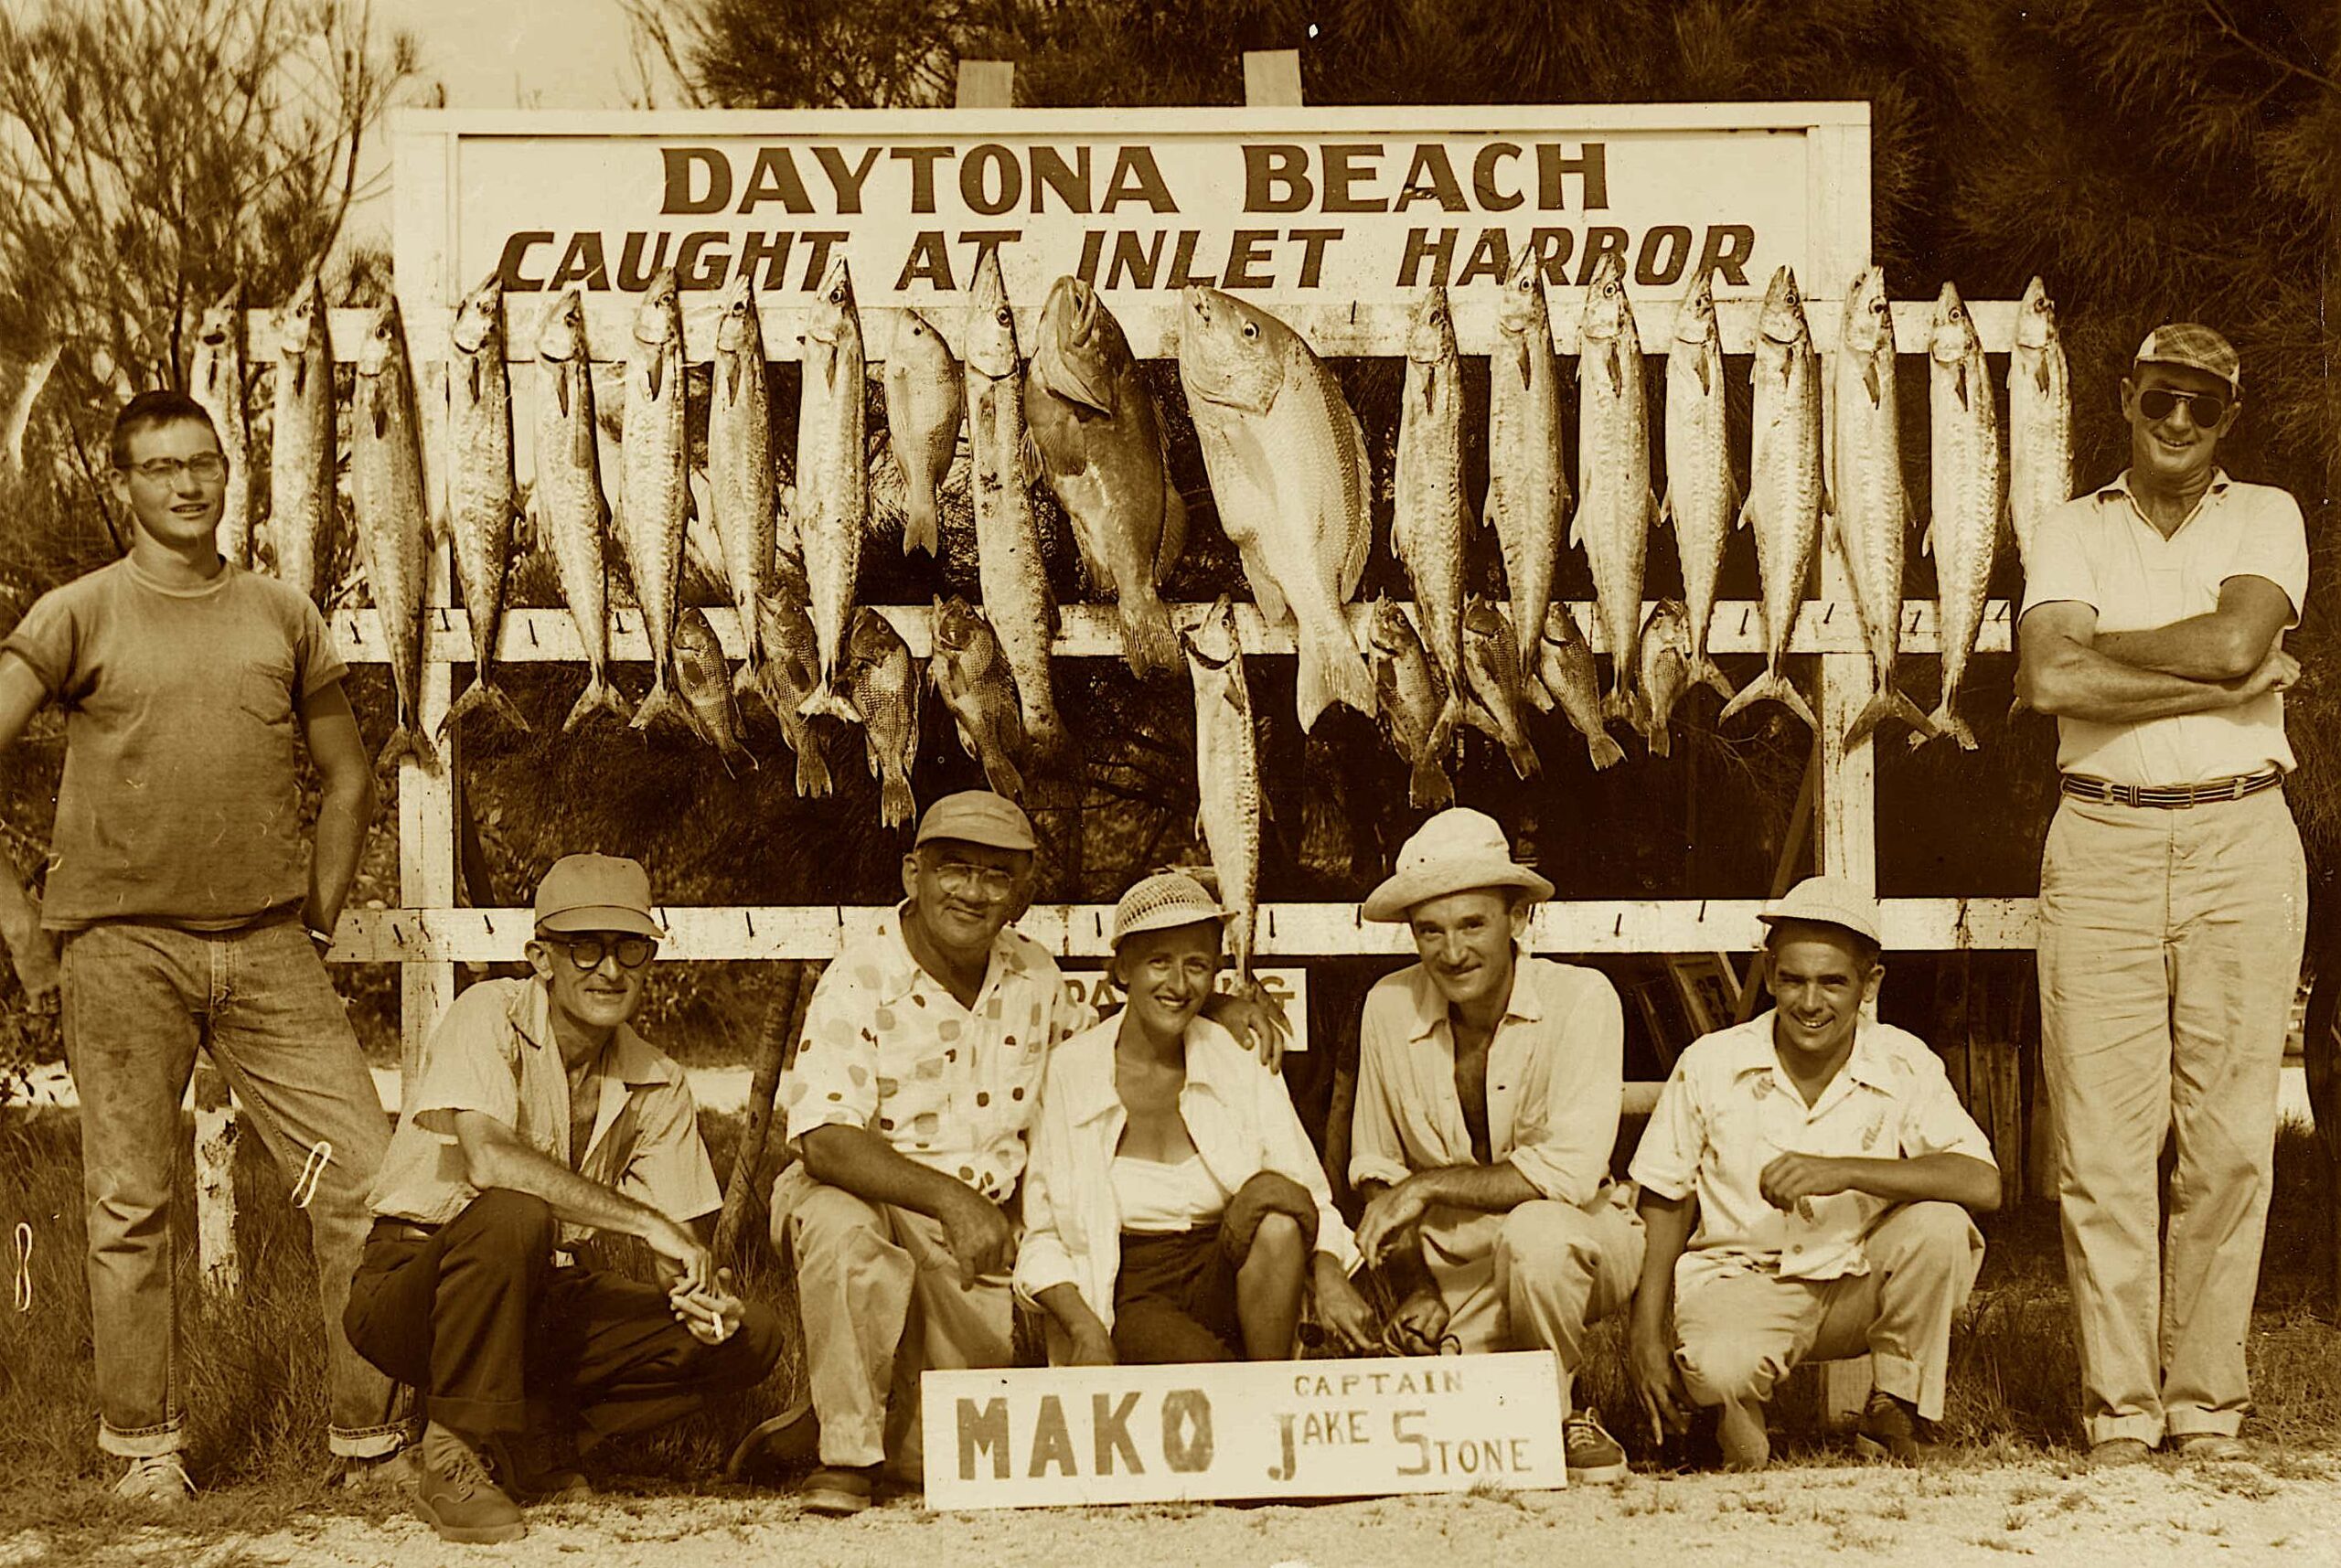 image: fishers with their catches, Daytona Beach, 1952.